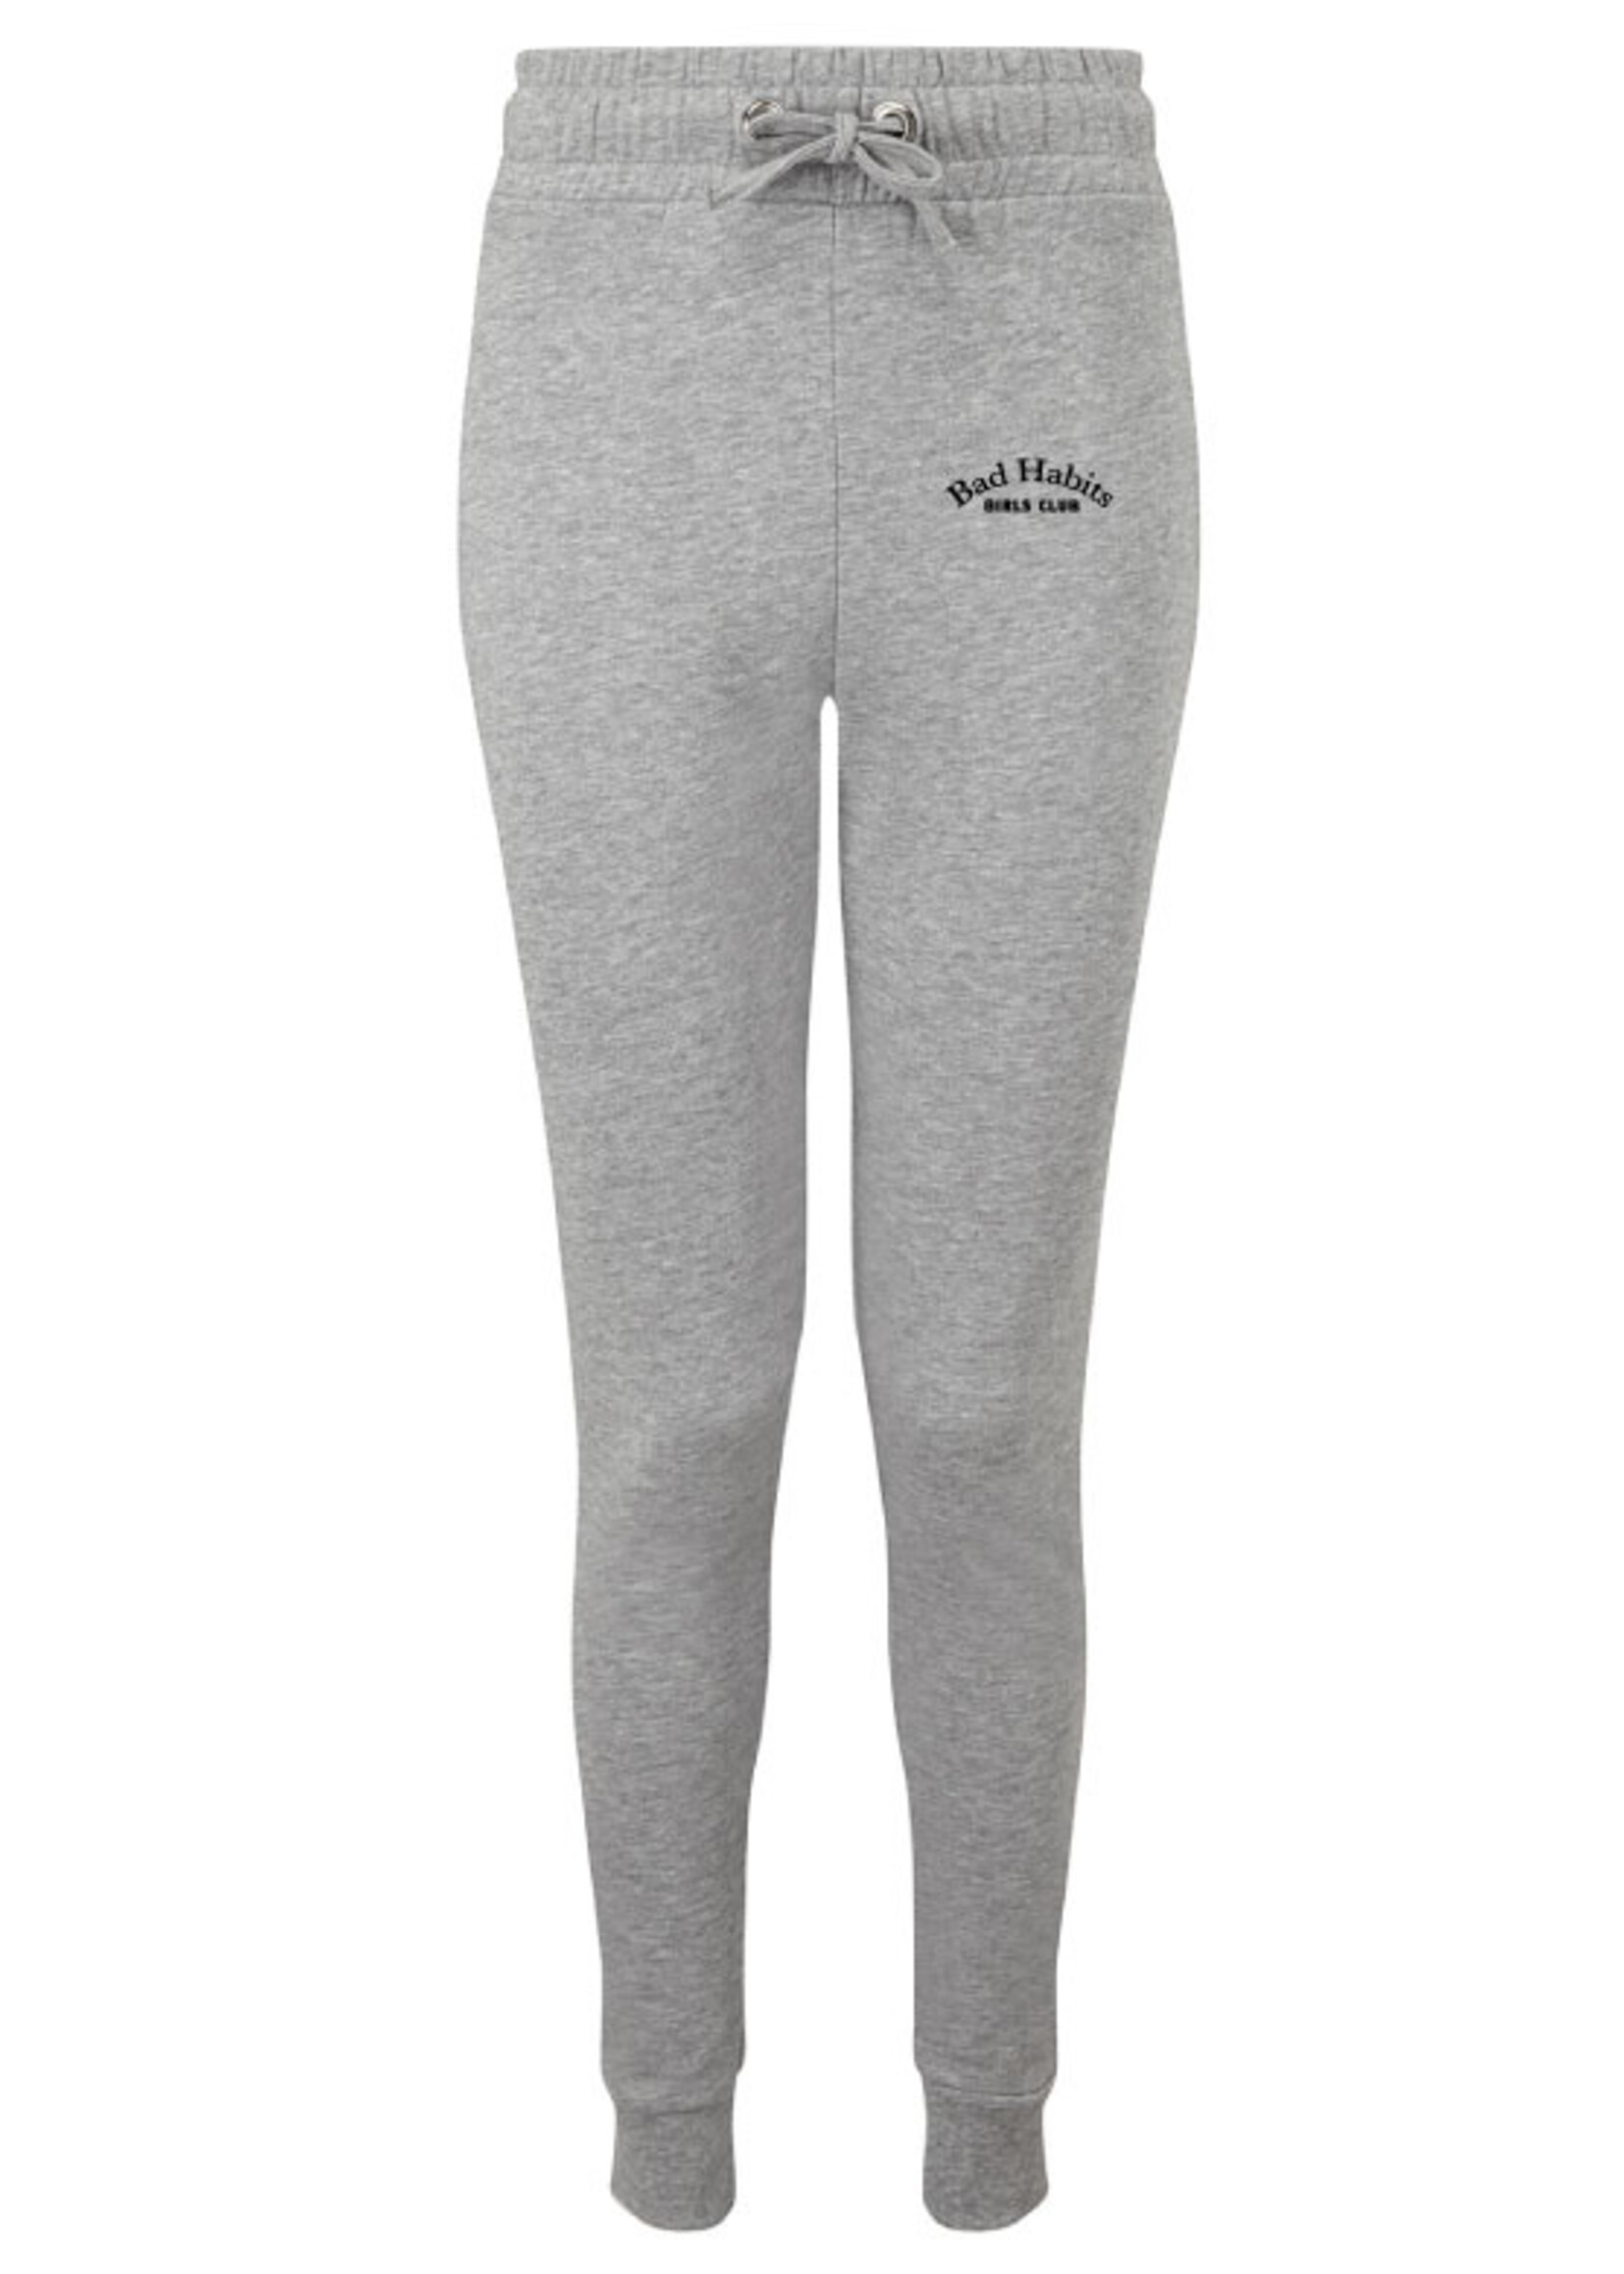 COUTURE JOGGER GREY